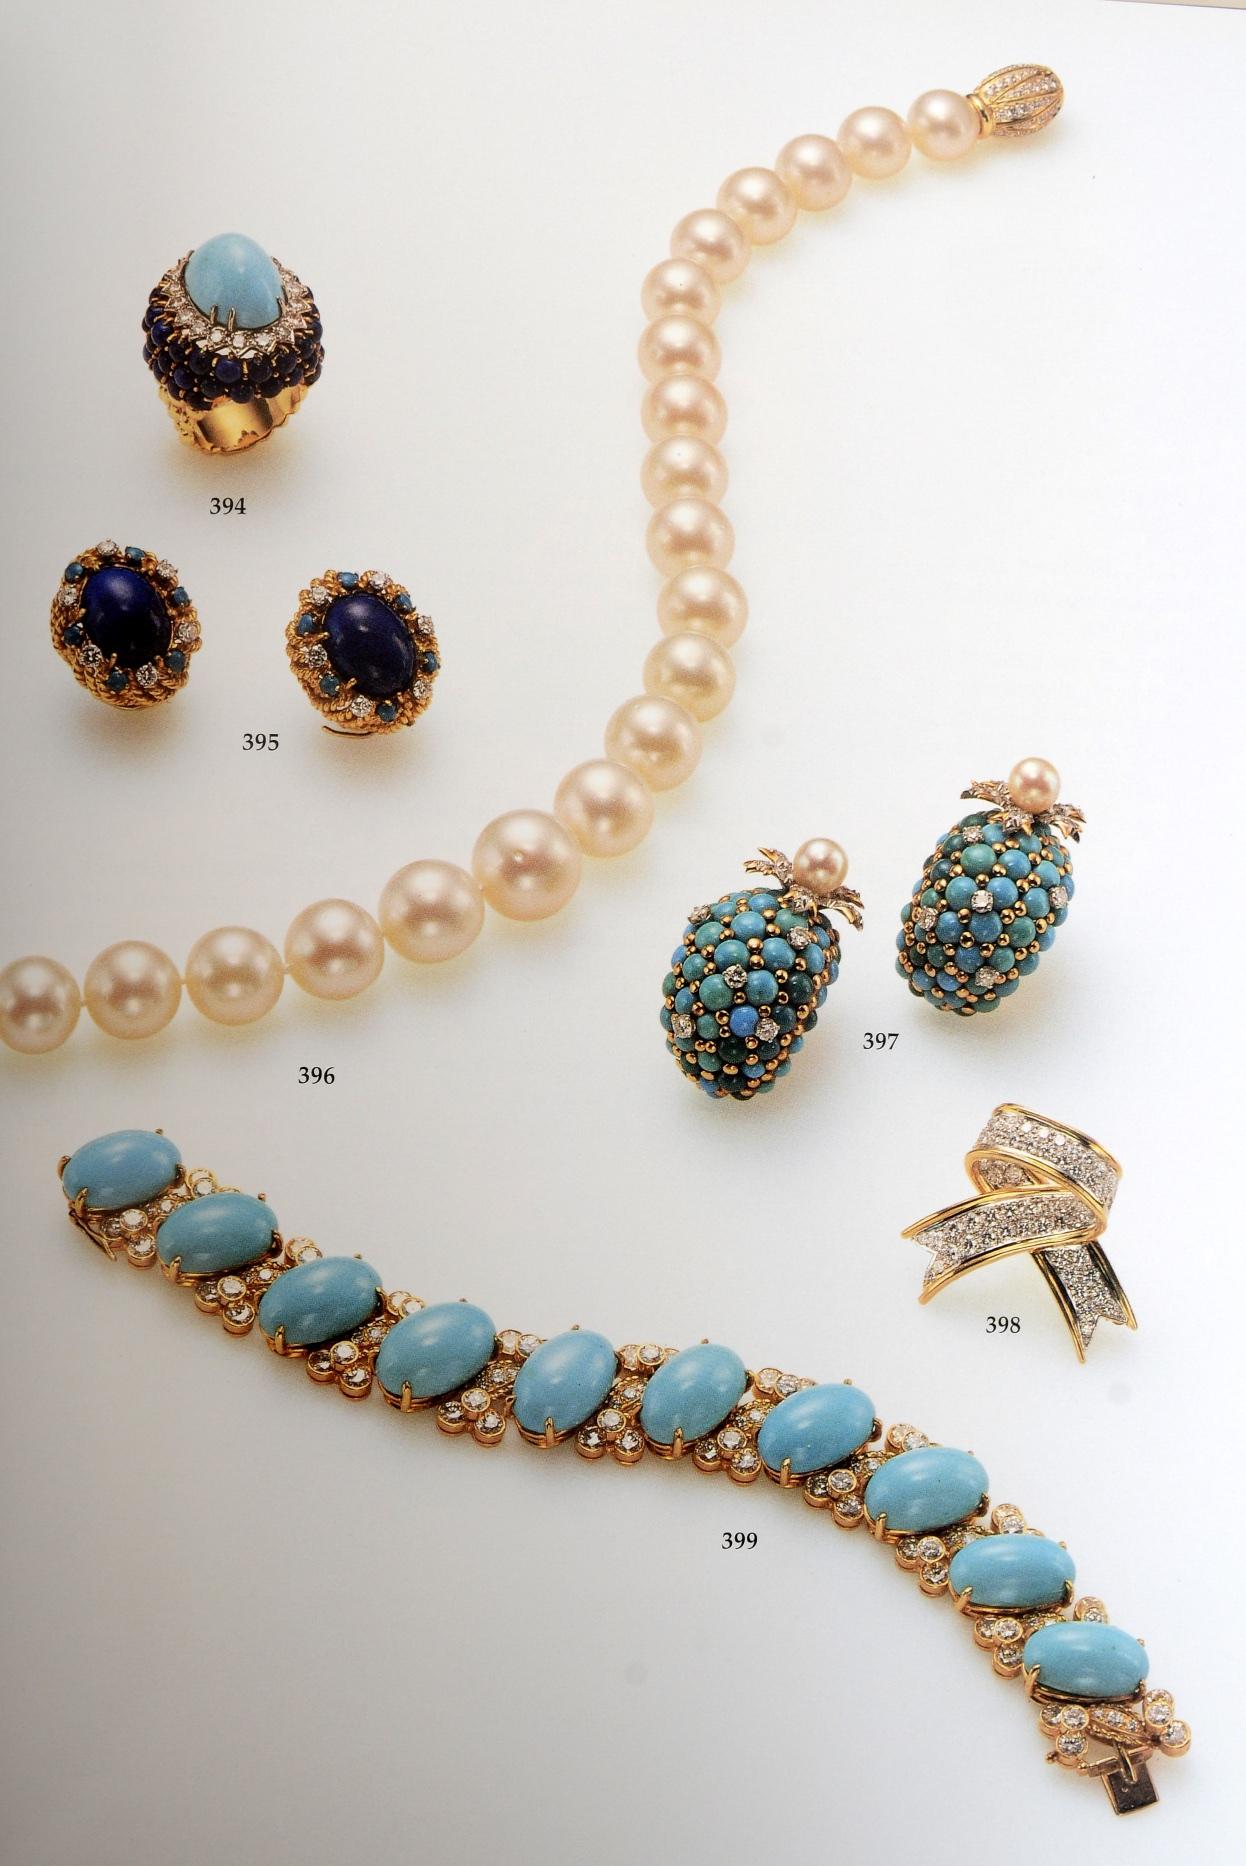 Fine Jewels and Watches. Sotheby's Sale 7312, Los Angeles, May 4, 1999 For Sale 3